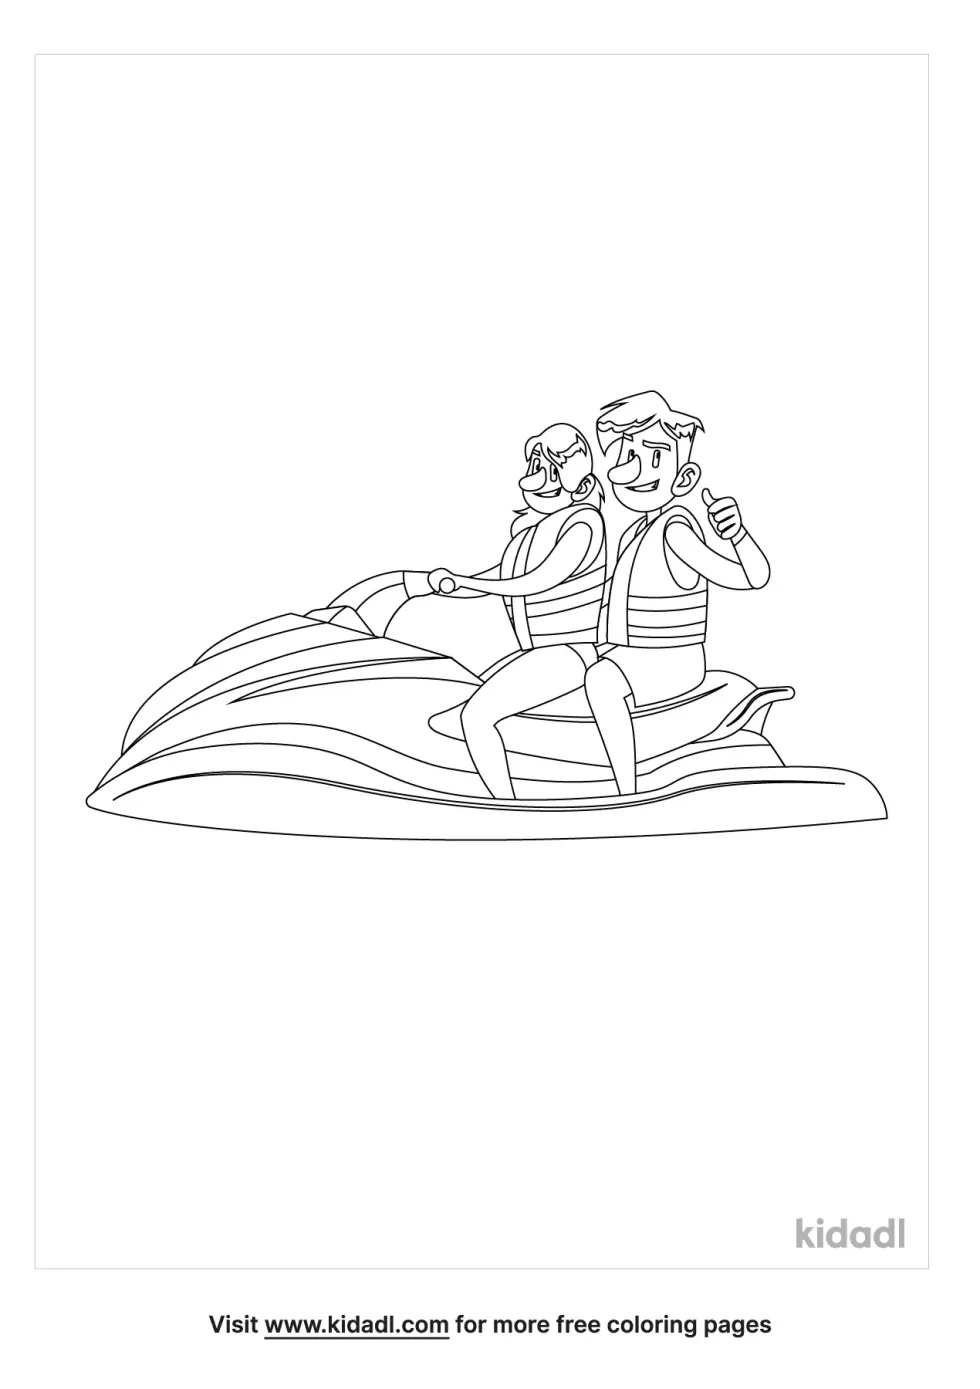 Water Sports Coloring Page